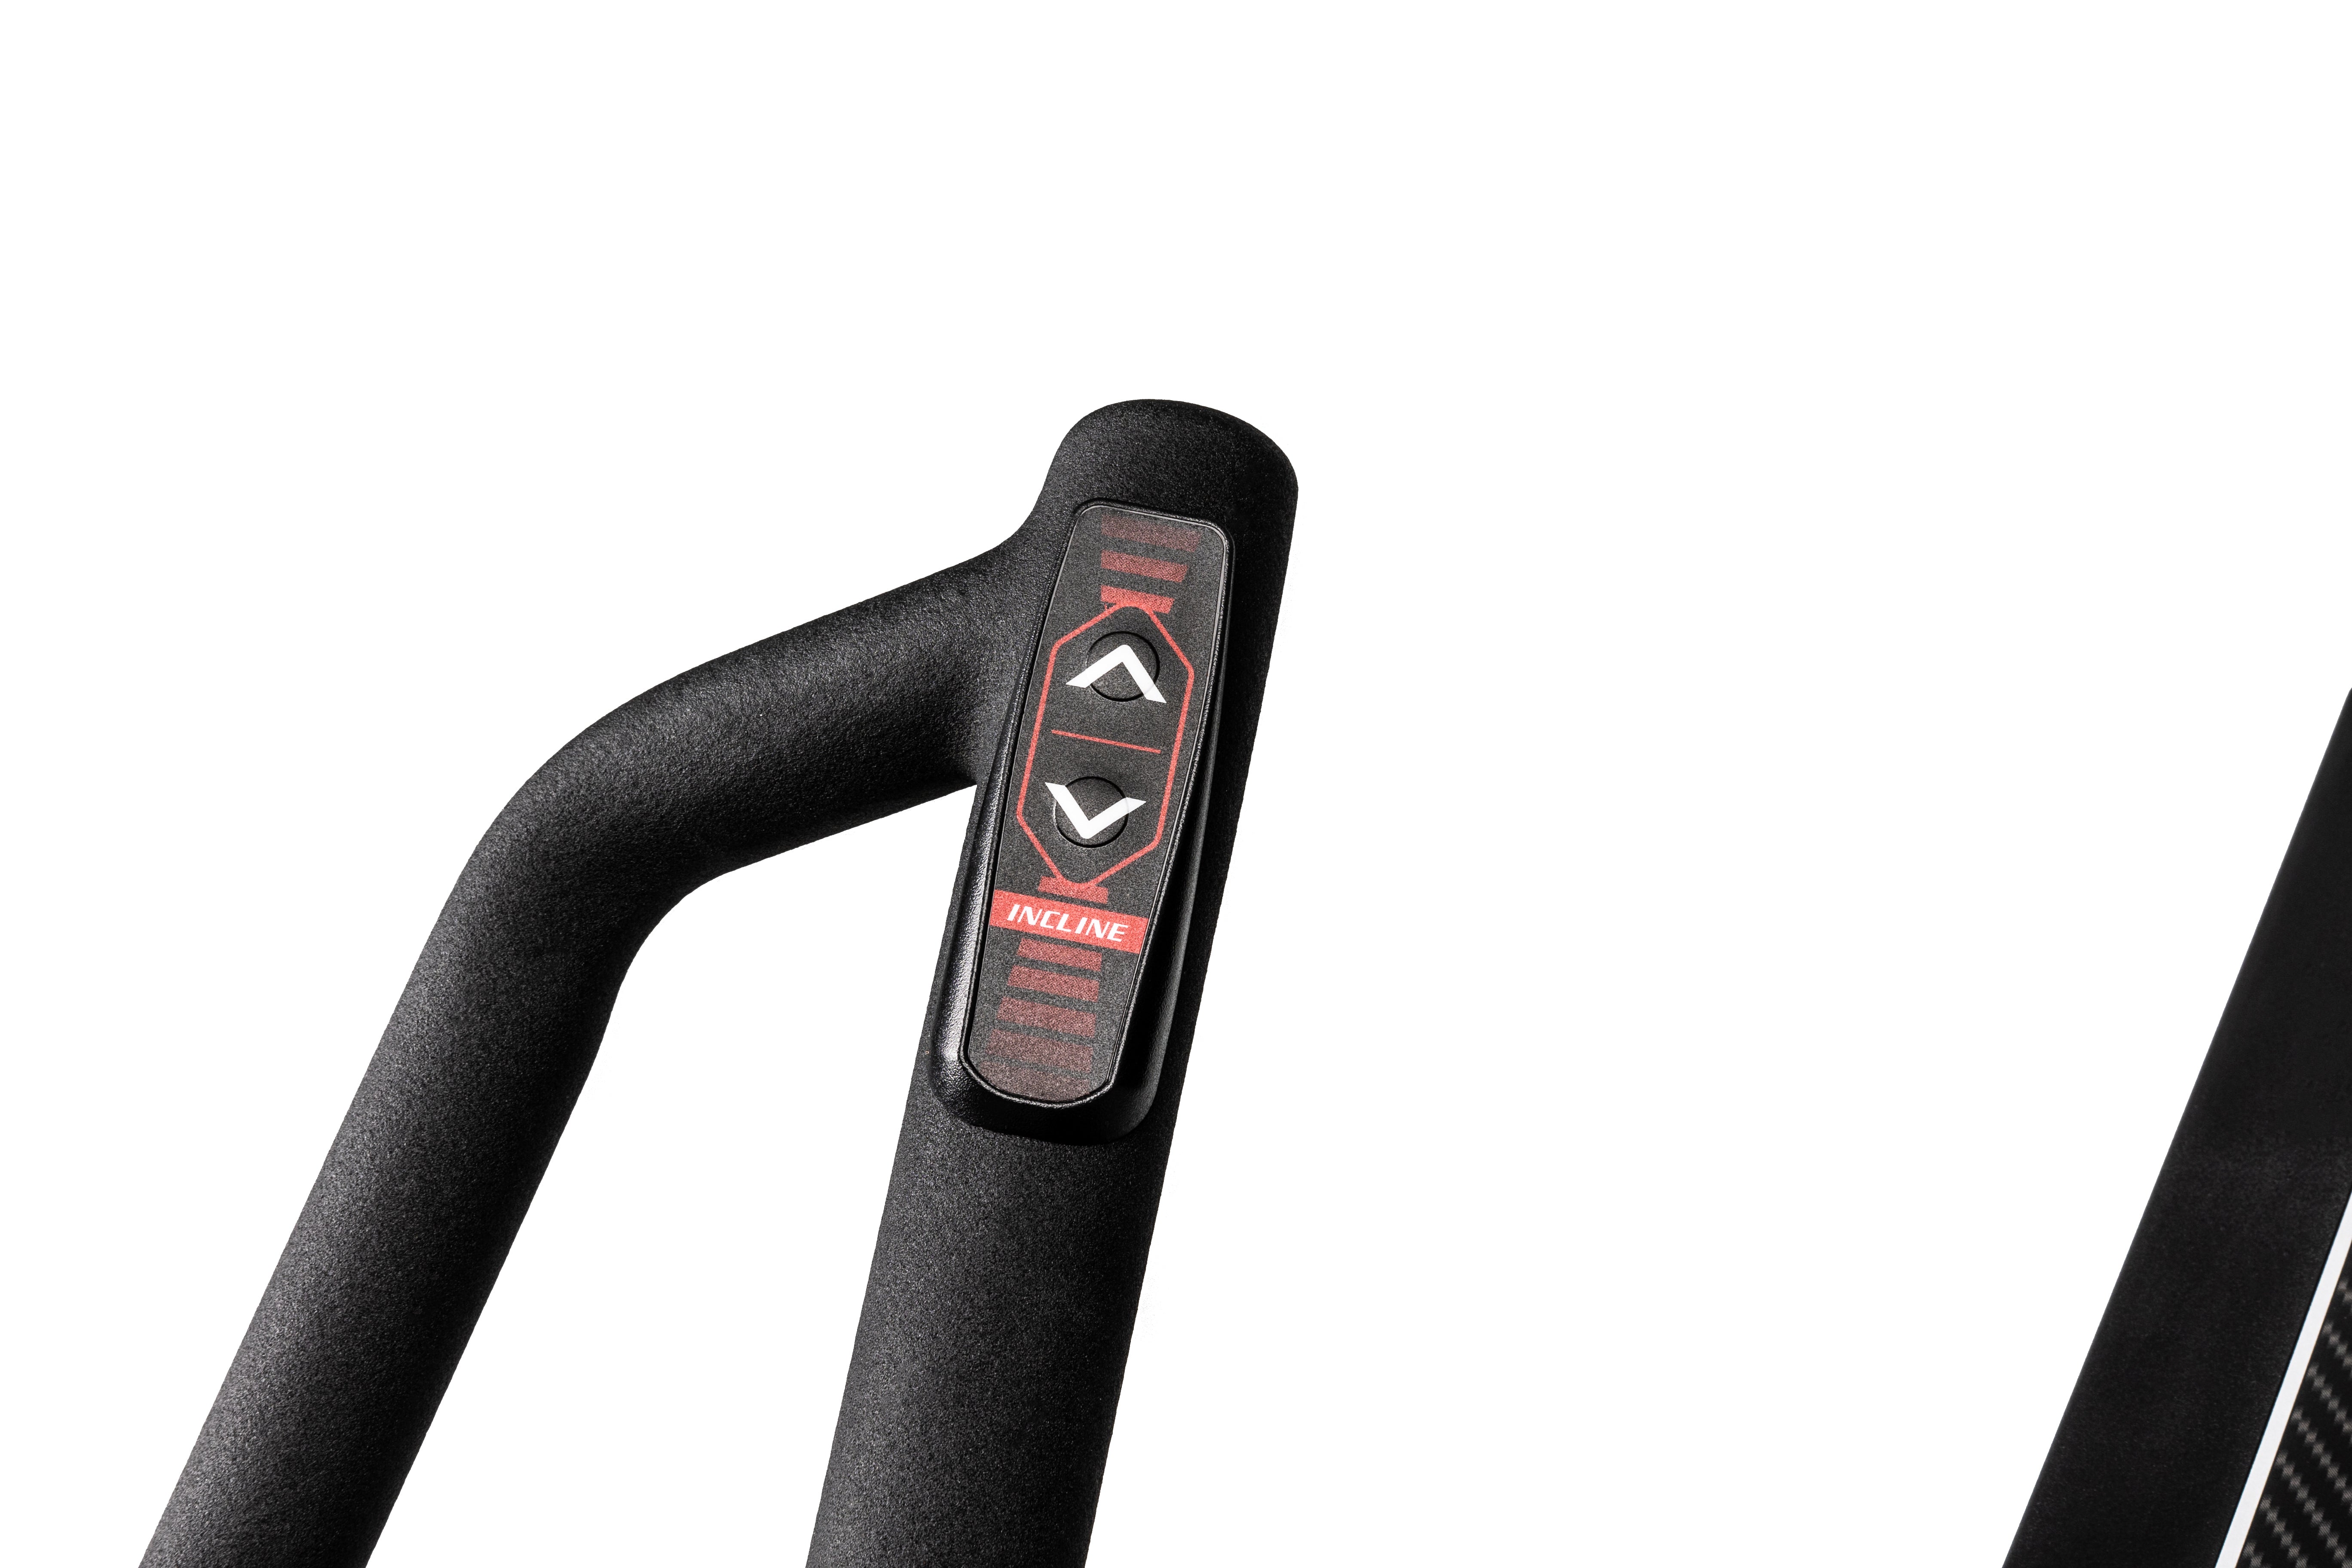 Close-up of the Sole E35 elliptical machine's handlebar, focusing on the textured grip and the "INCLINE" control buttons. The buttons are outlined in red, featuring upward and downward arrows for incline adjustments. The background is primarily white with a hint of another part of the elliptical in the corner.